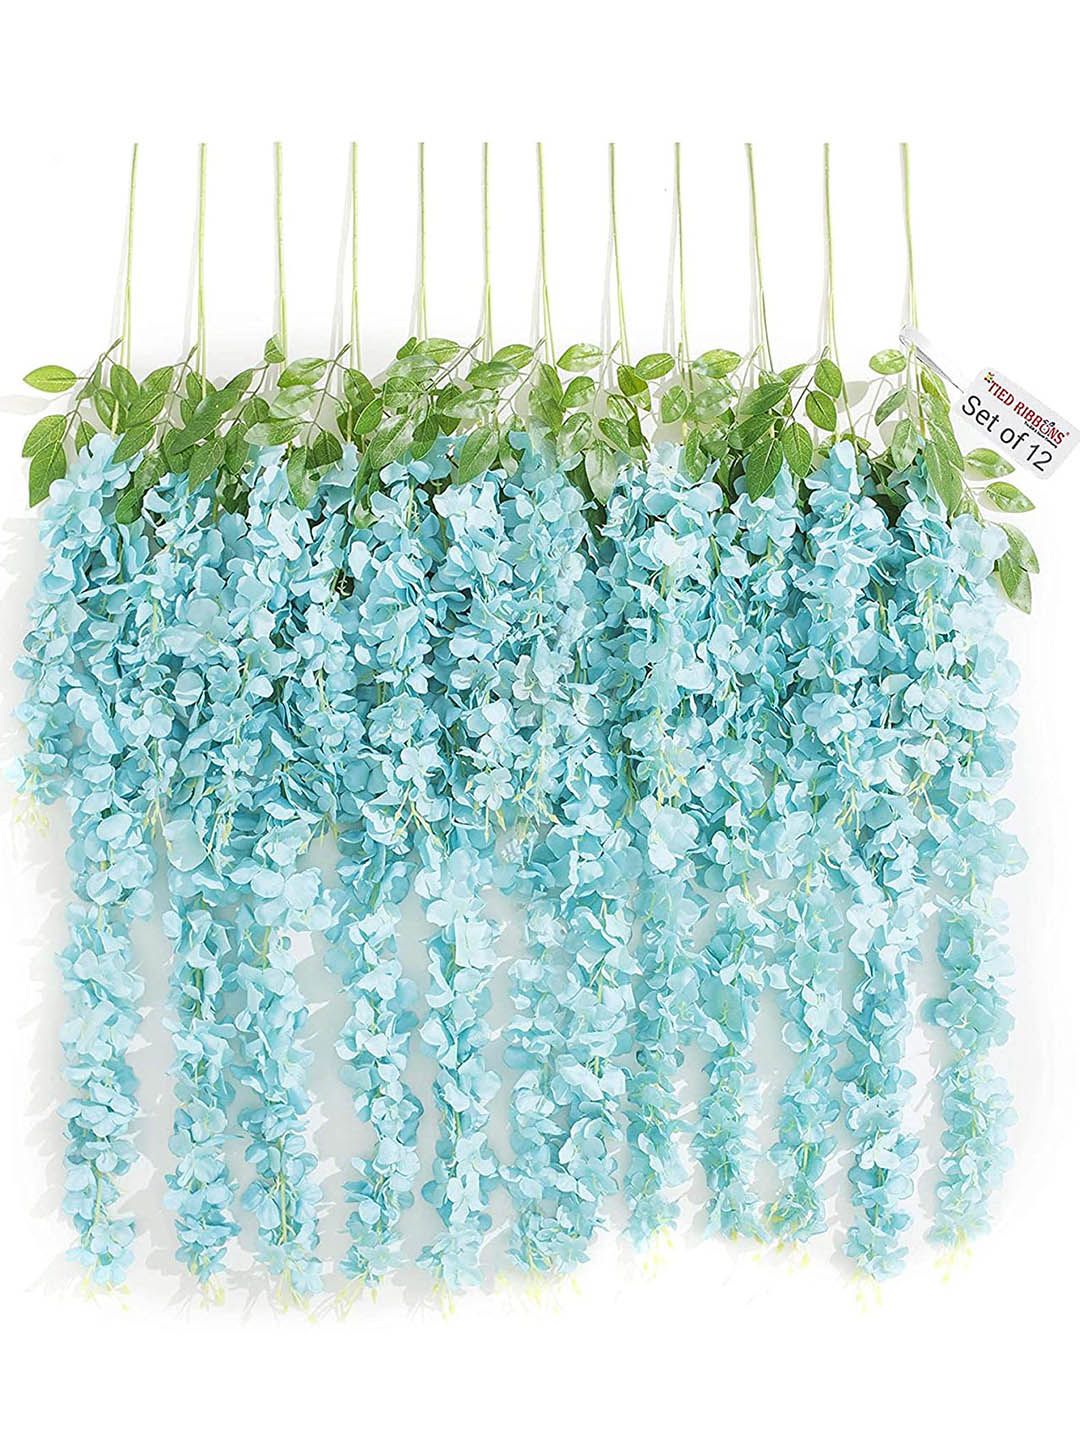 TIED RIBBONS Set Of 12 Turquoise-Blue & Green Artificial Hanging Wisteria Flower-Strings Price in India